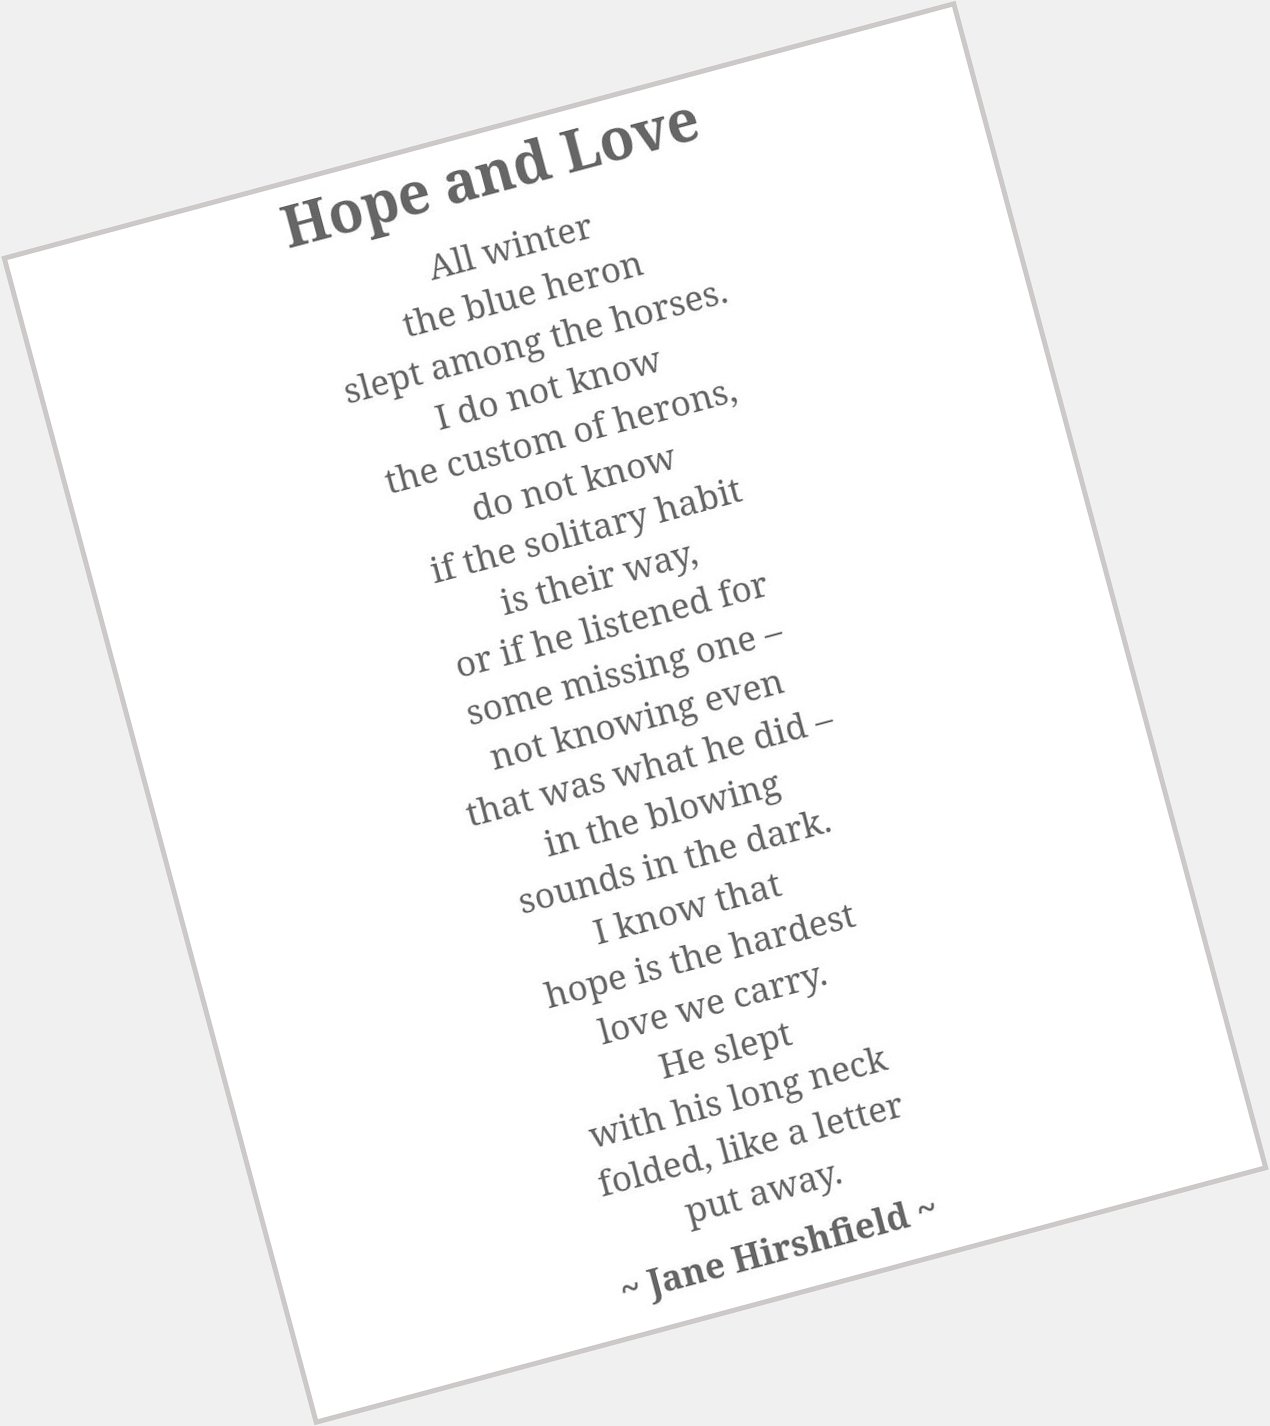 \"I know that / hope is the hardest / love we carry\". Happy birthday, Jane Hirshfield! 